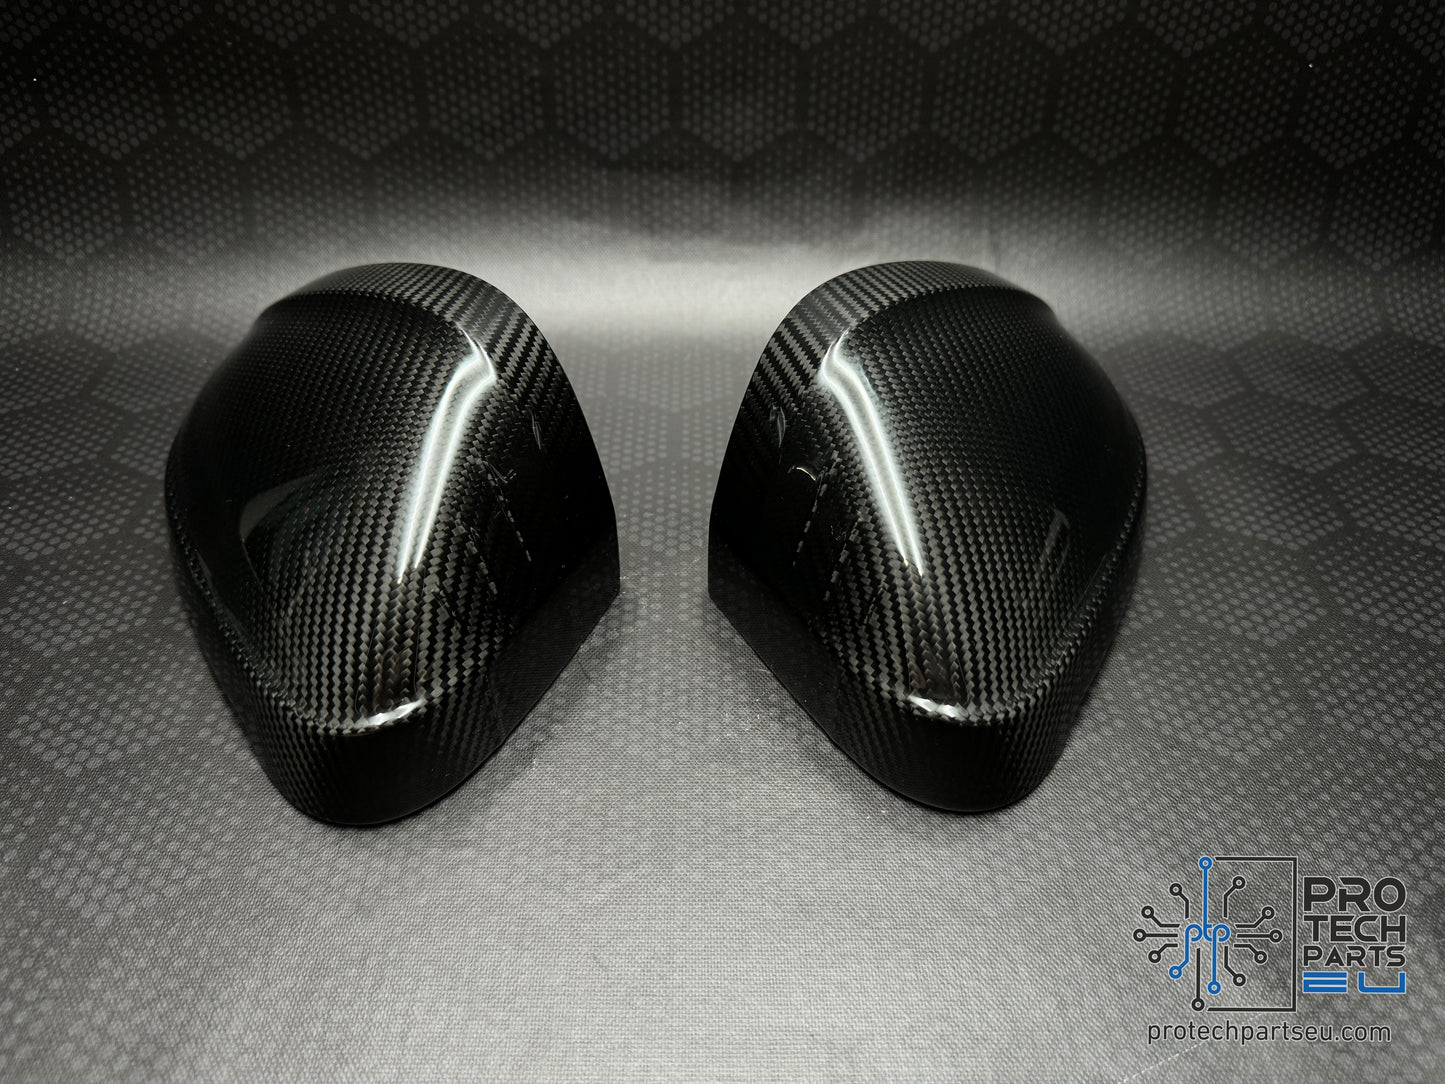 
                  
                    Genuine AUDI A4,A5,RS4,RS5 carbon fiber mirror cover caps set glossy finish
                  
                